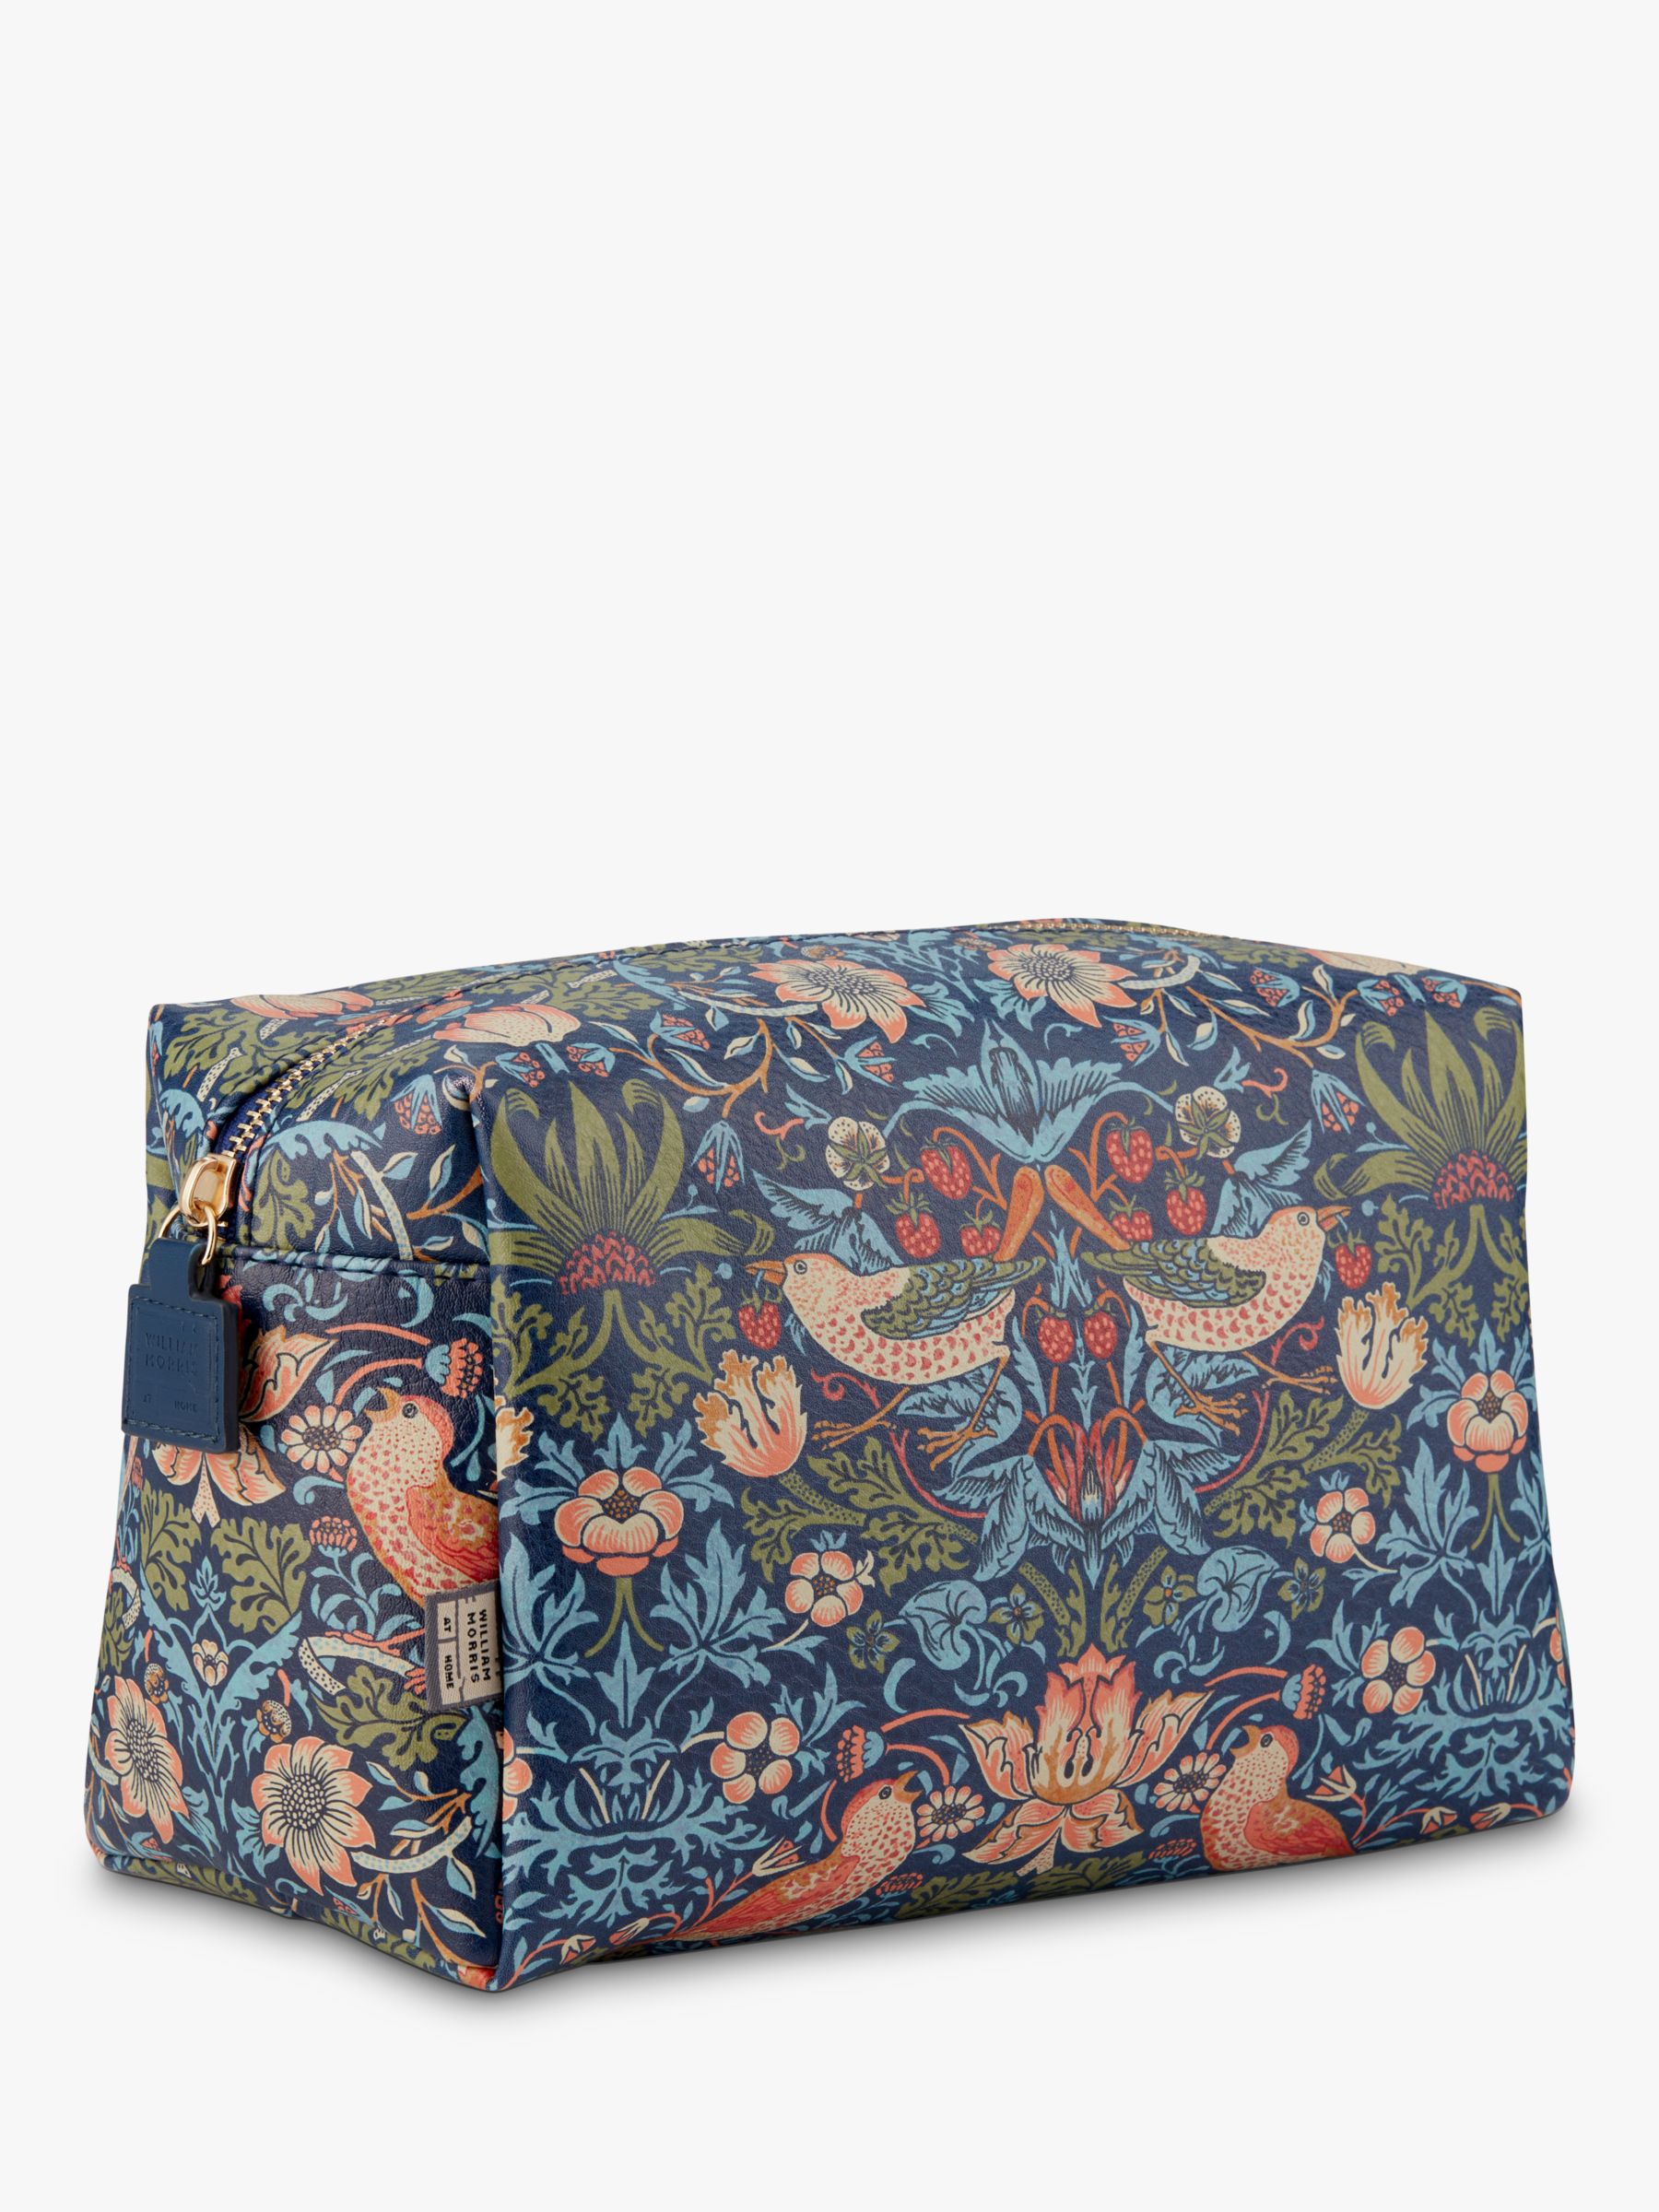 William Morris At Home Strawberry Thief Large Wash Bag 1